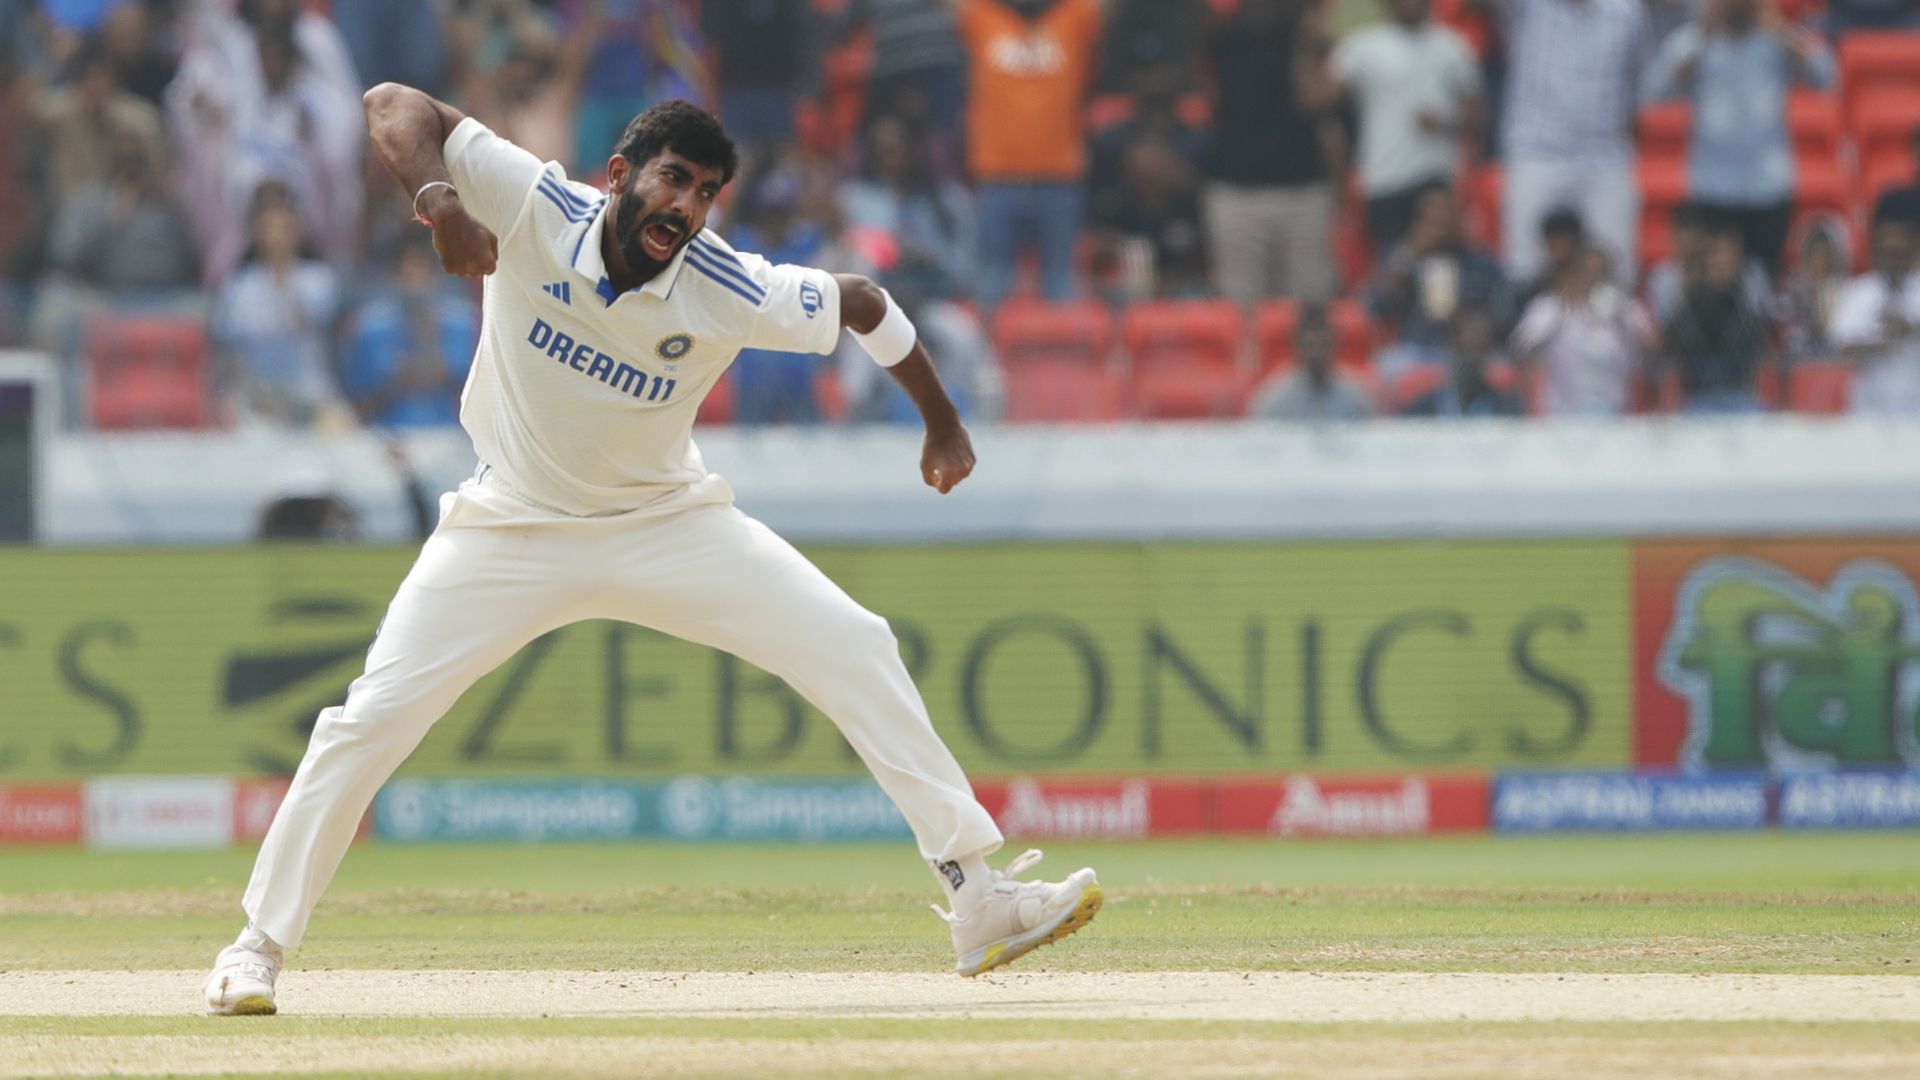 Jasprit Bumrah was understandably ecstatic after cleaning up Duckett